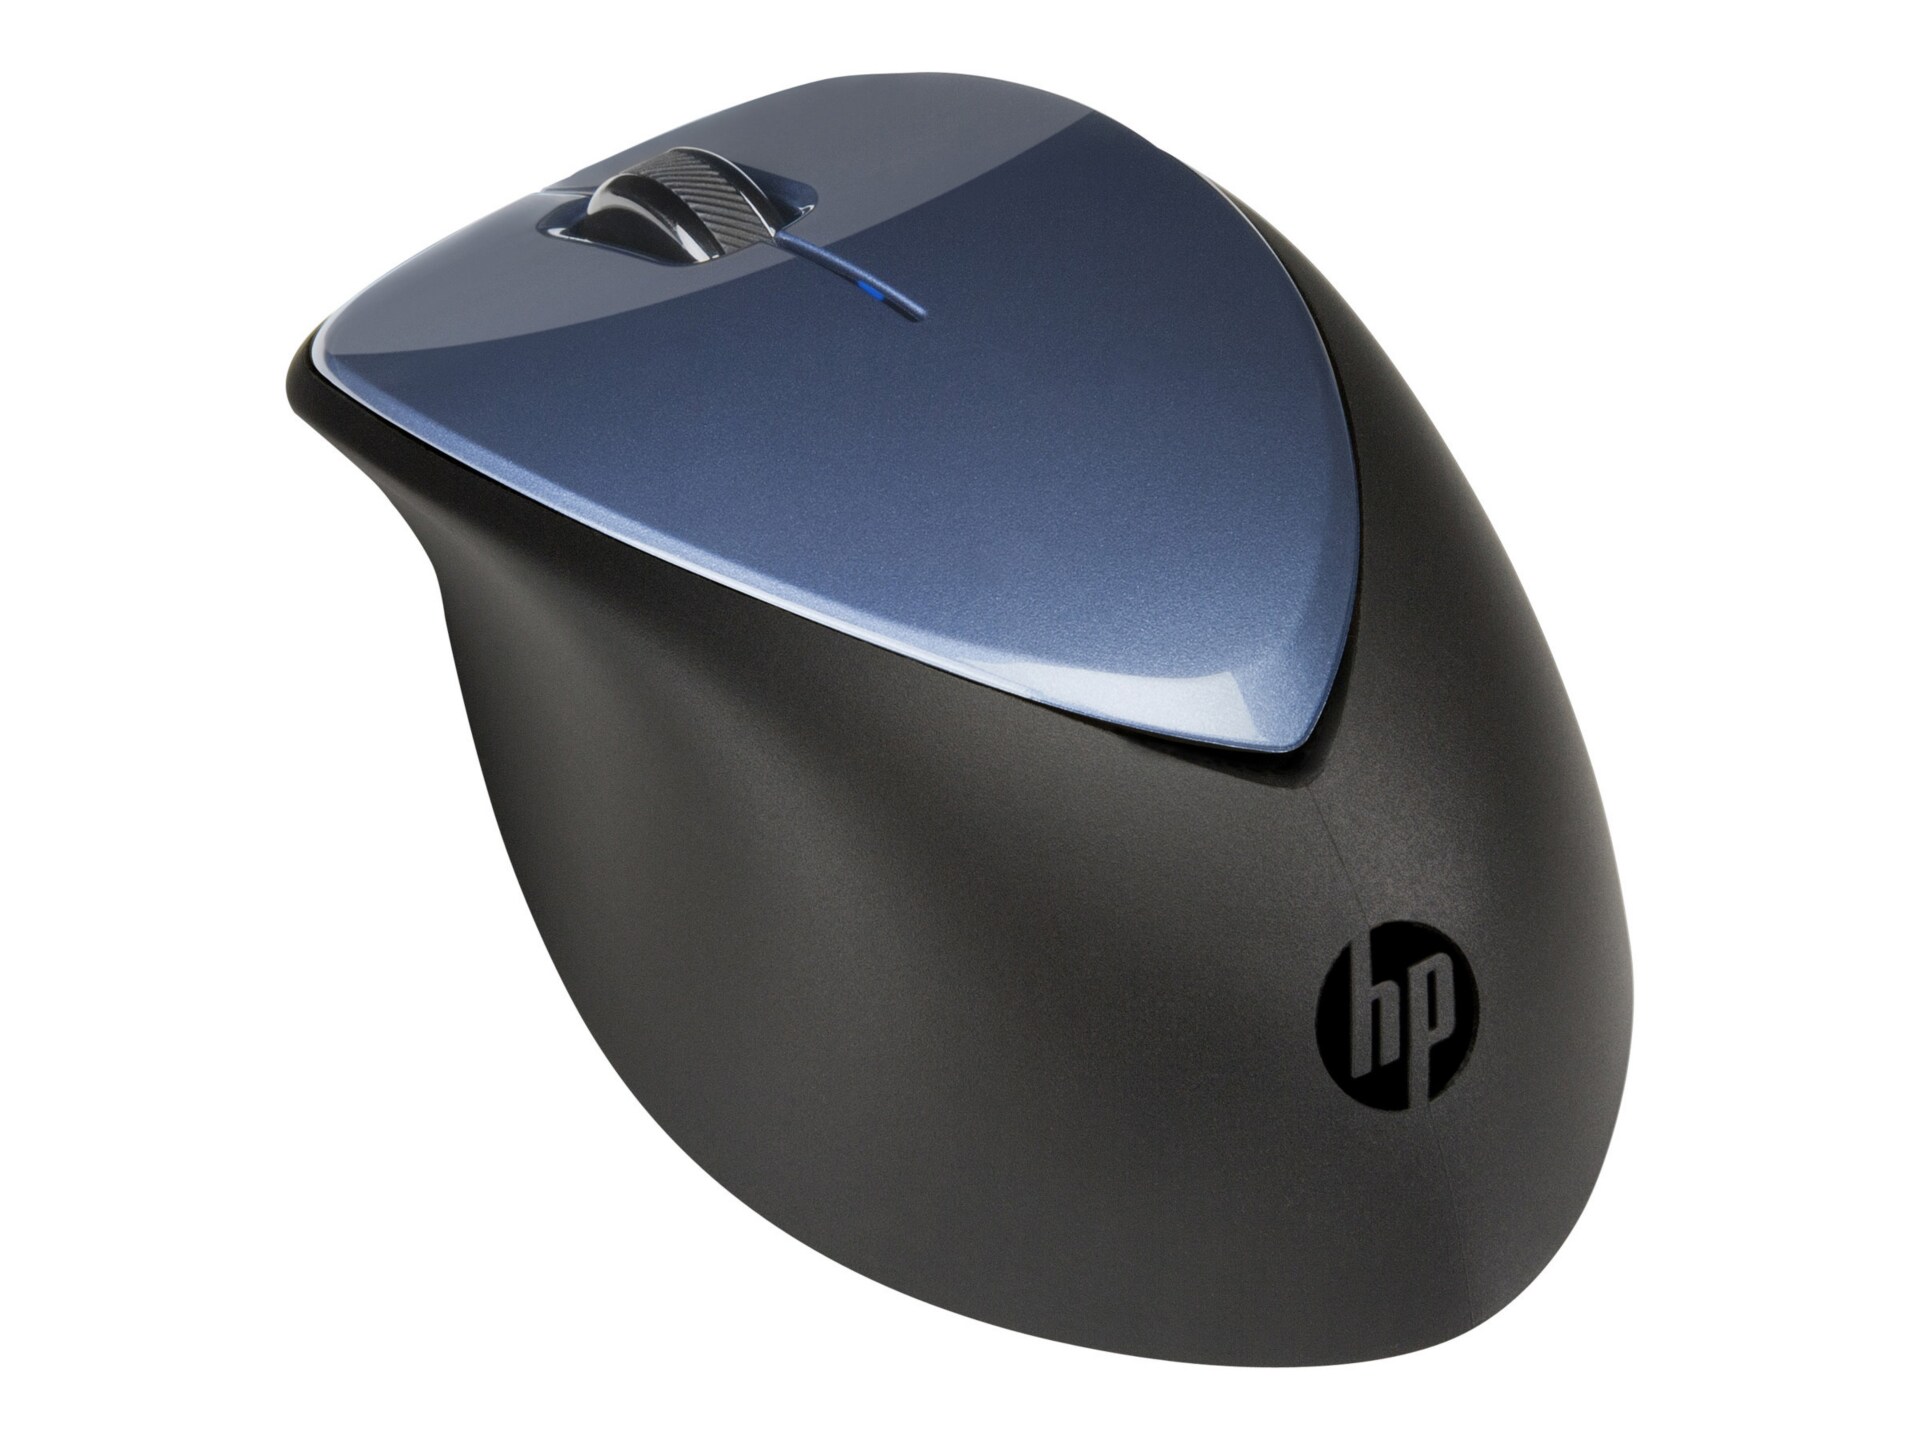 HP x4000 - mouse - 2.4 GHz - winter blue